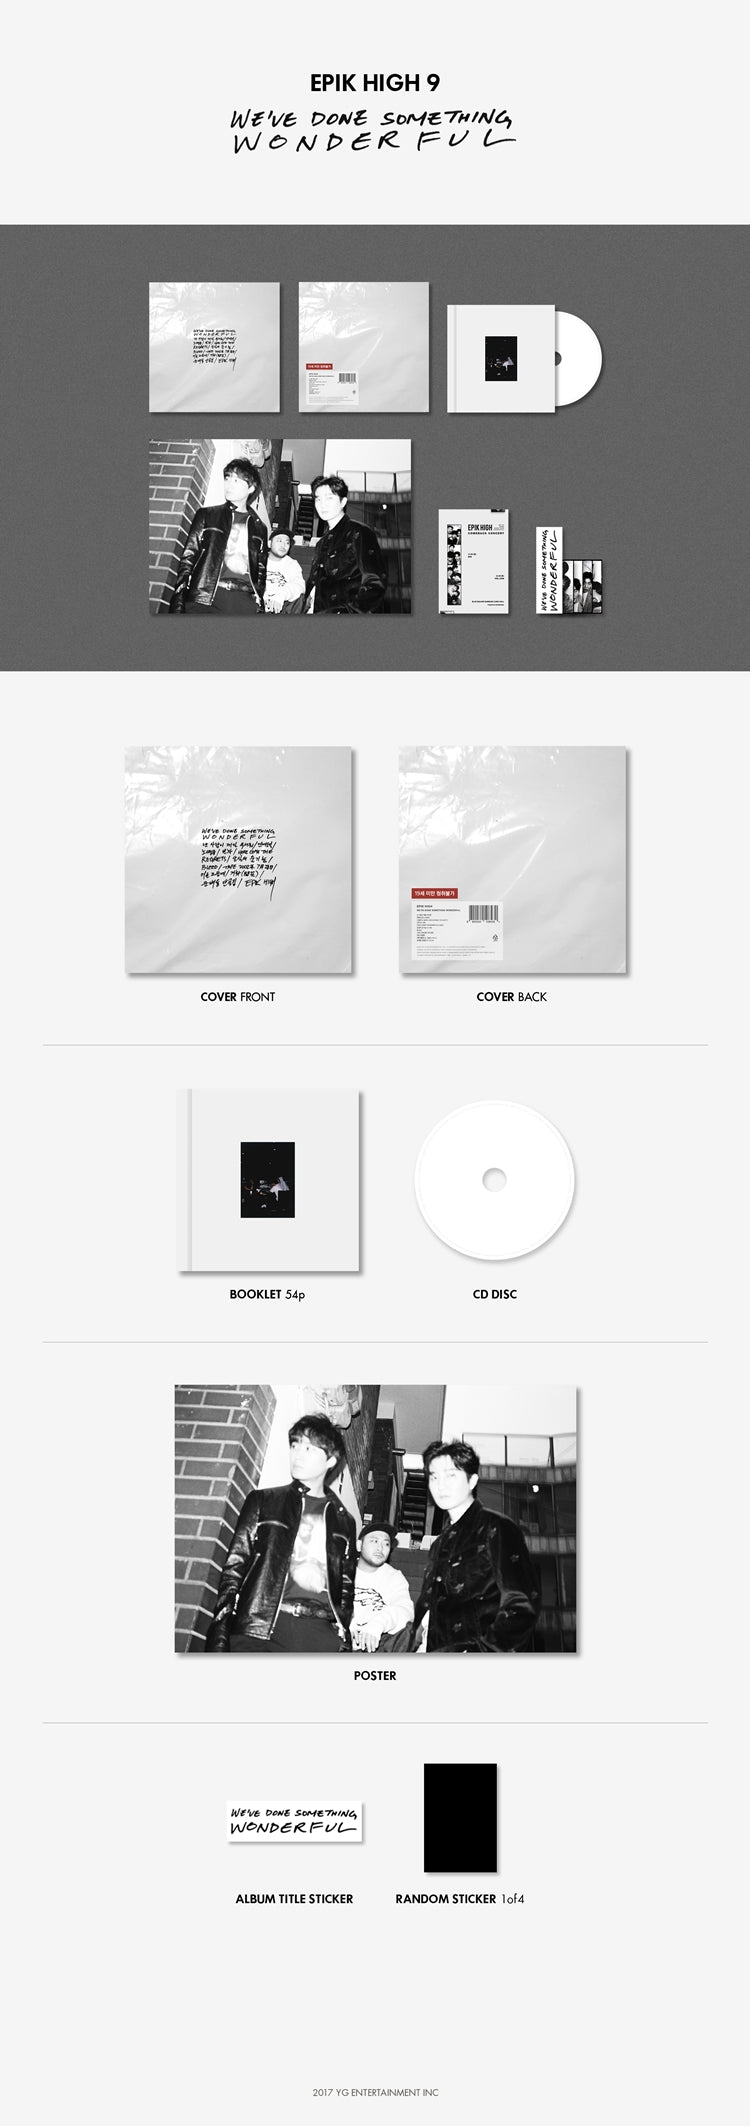 1 CD
1 Booklet (54 pages)
1 Photo Sticker
1 Concert Postcard
1 Folded Poster